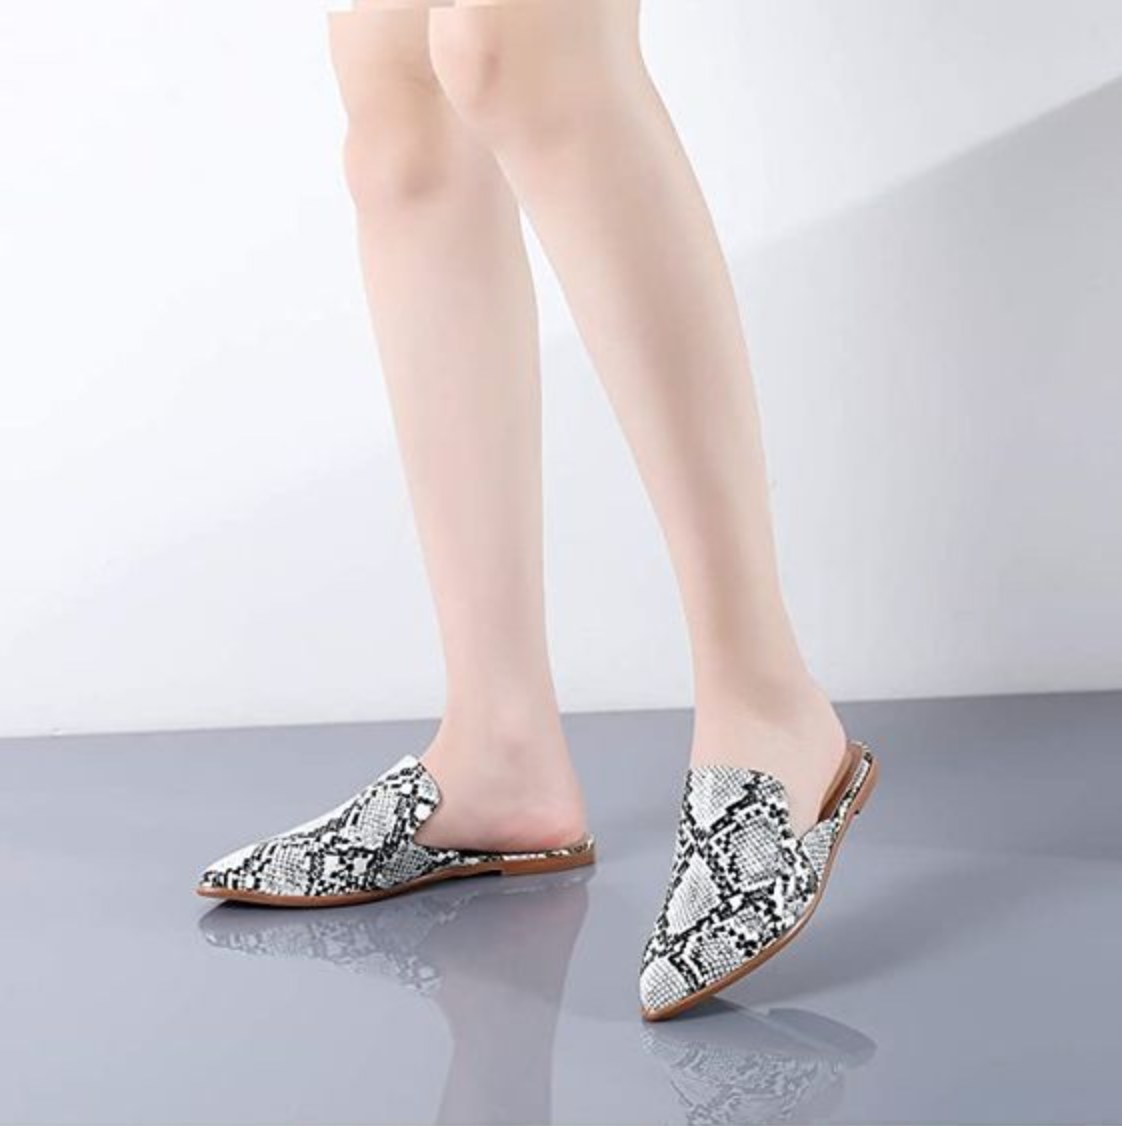 Flats for Women Pointed Toe Rhinestone Ballet Flats Memory Foam Insole Suede Loafers Womens Comfortable Slip on Work Shoes 